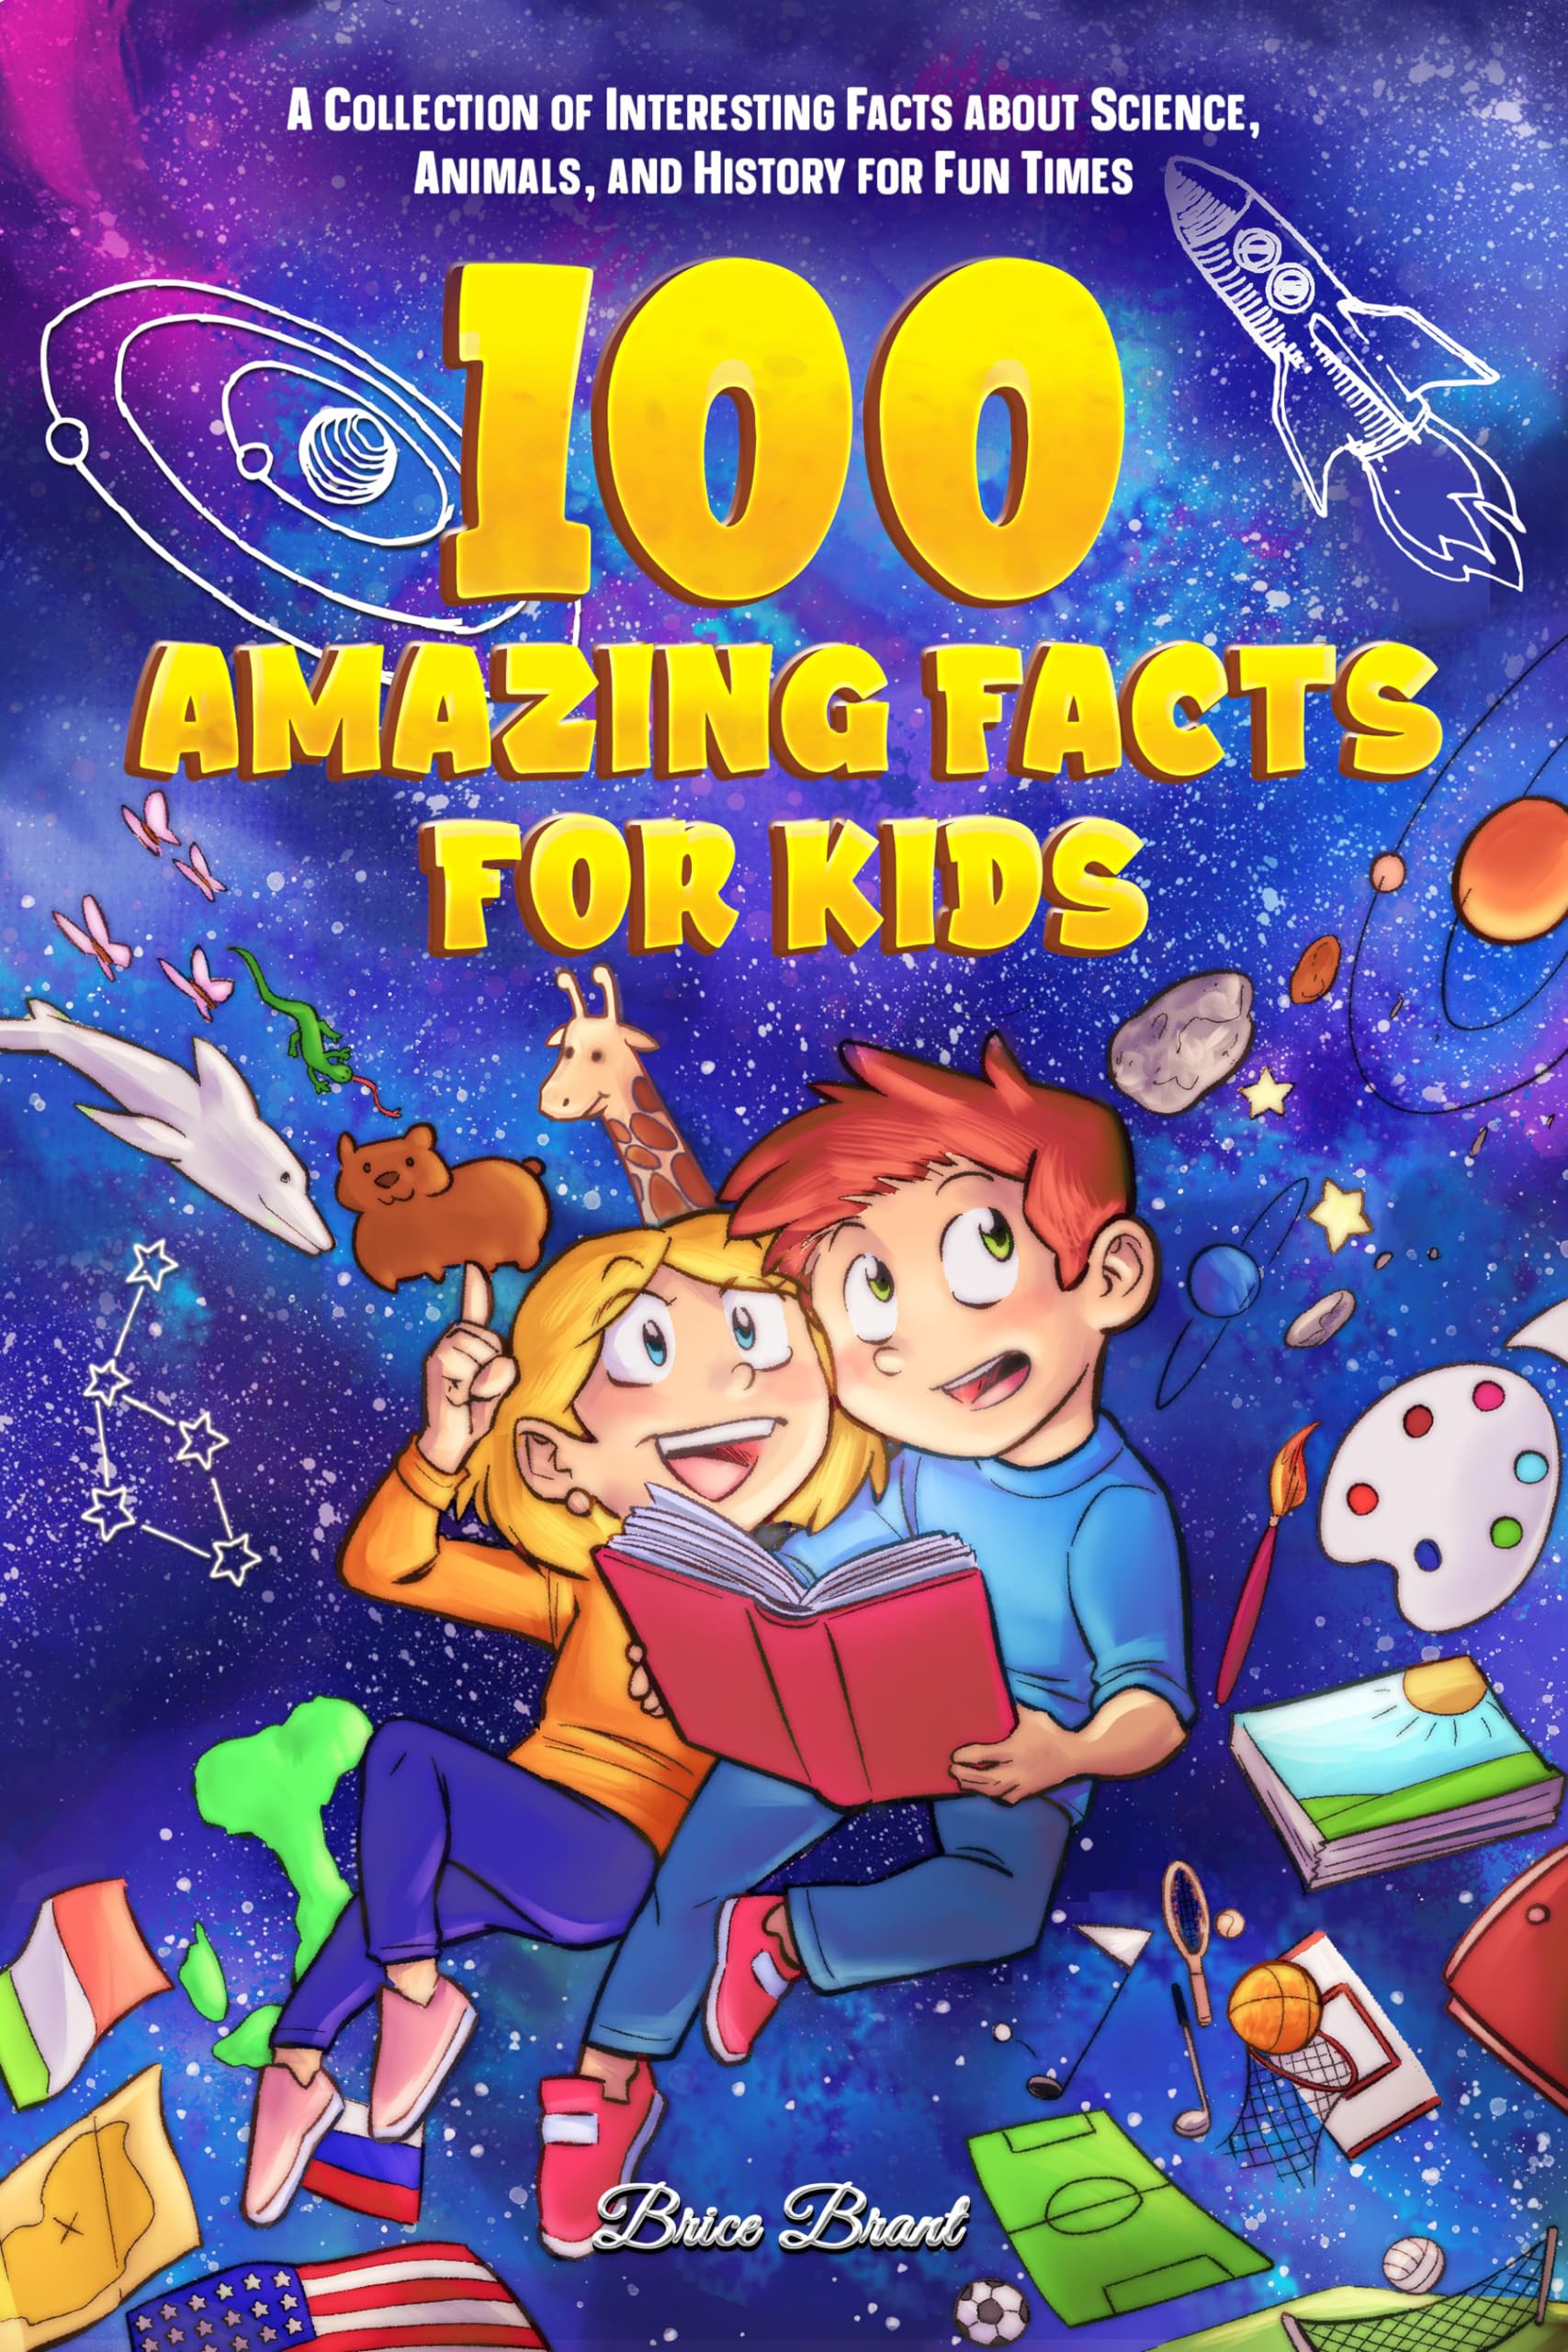 100 Amazing Facts for Kids: A Collection of Interesting Facts about Science, Animals, and History for Fun Times (Ageless Explorers Series: Fun Facts for Kids, Teens, and Adults)